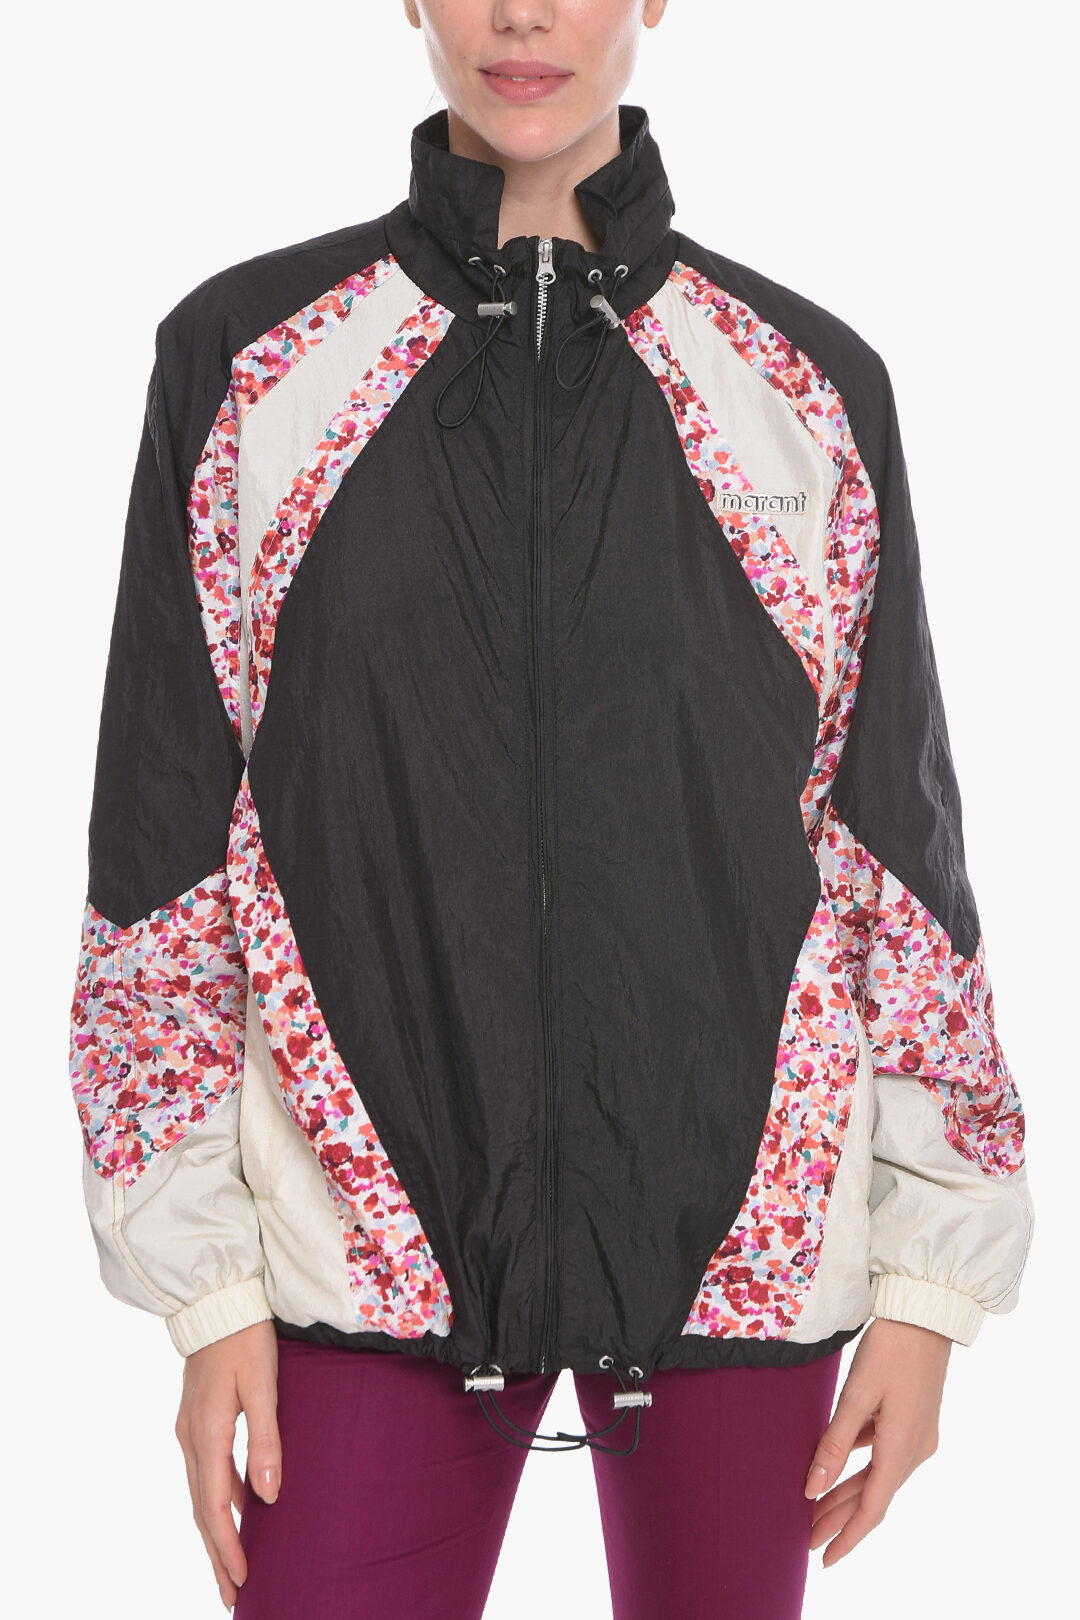 ETOILE Patchwork MIDAIAZI Jacket with Floral Pattern